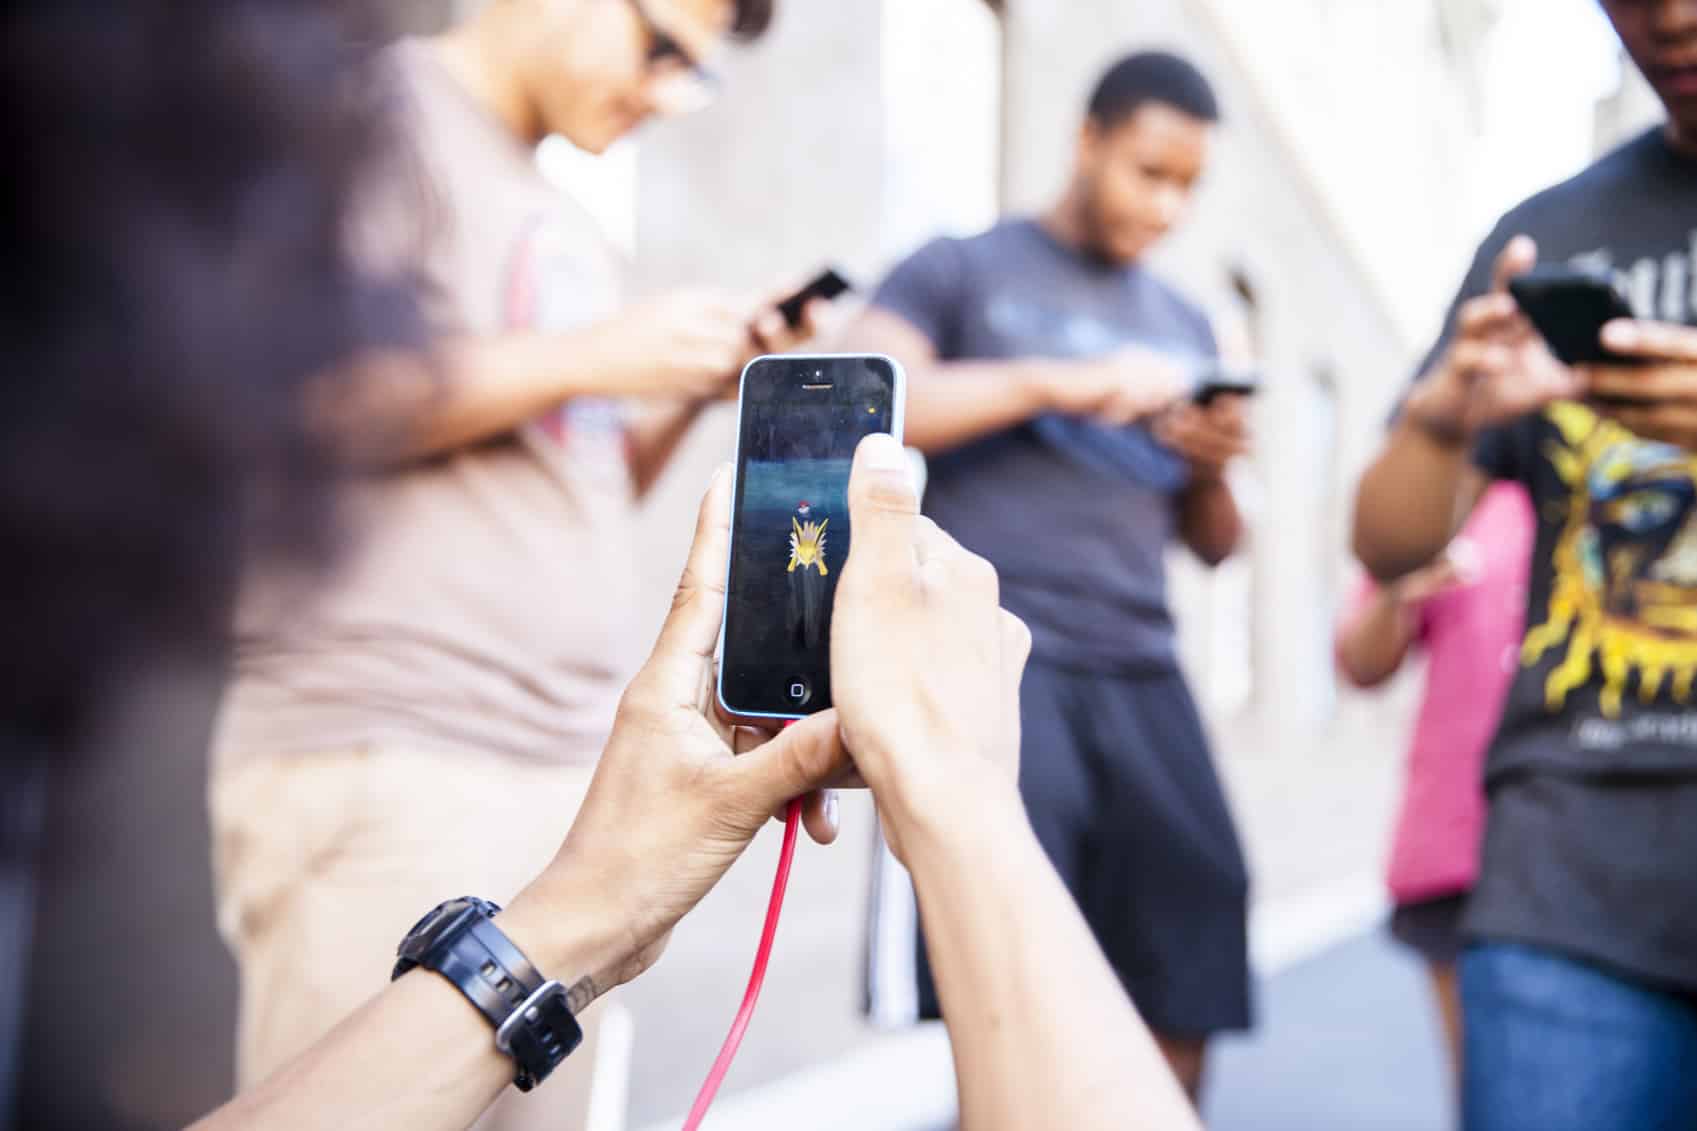 Pokemon Go App Being Played on iPhone